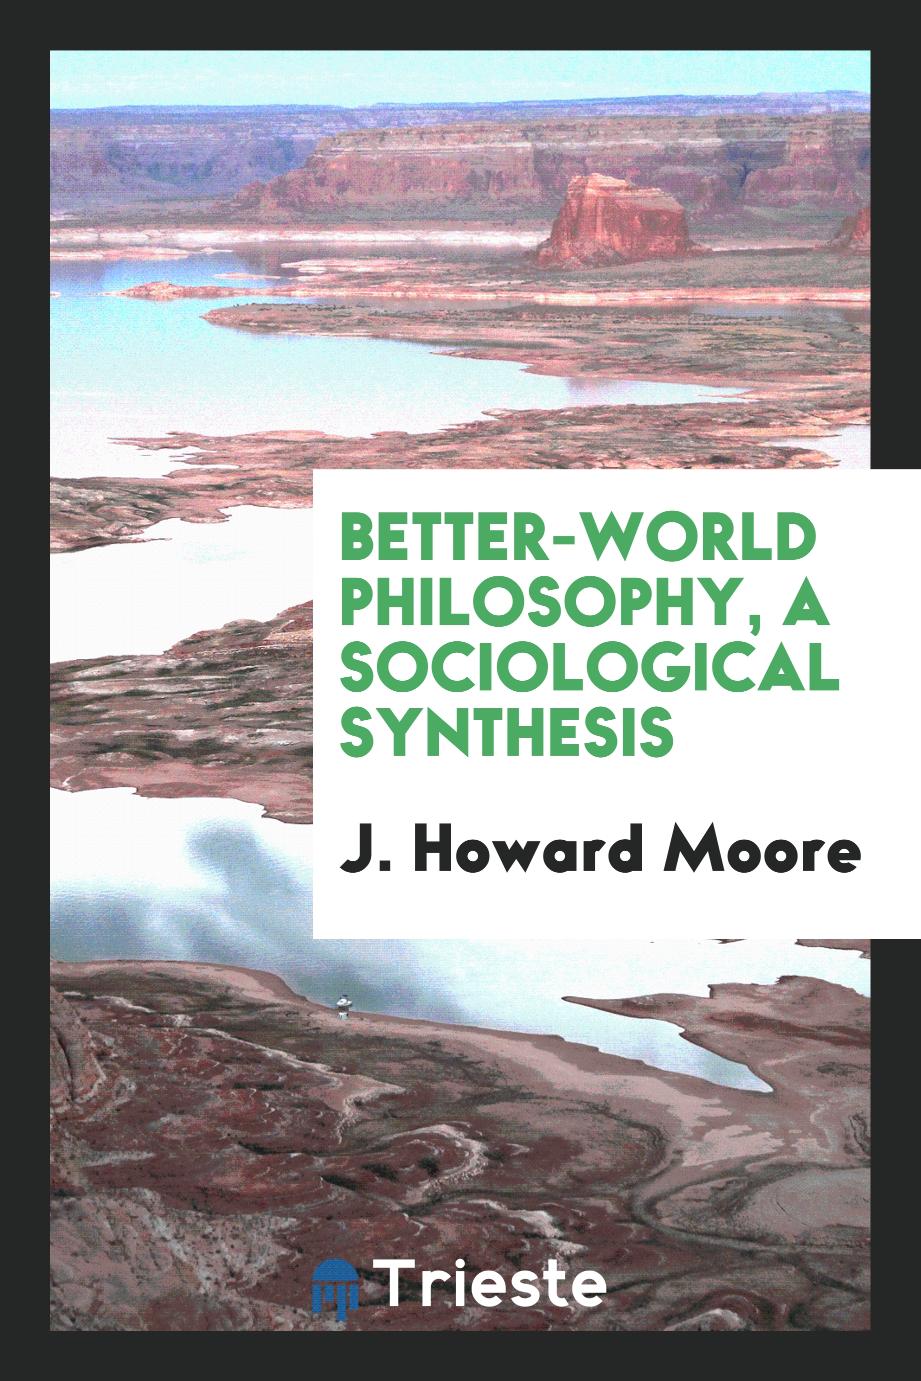 Better-world philosophy, a sociological synthesis